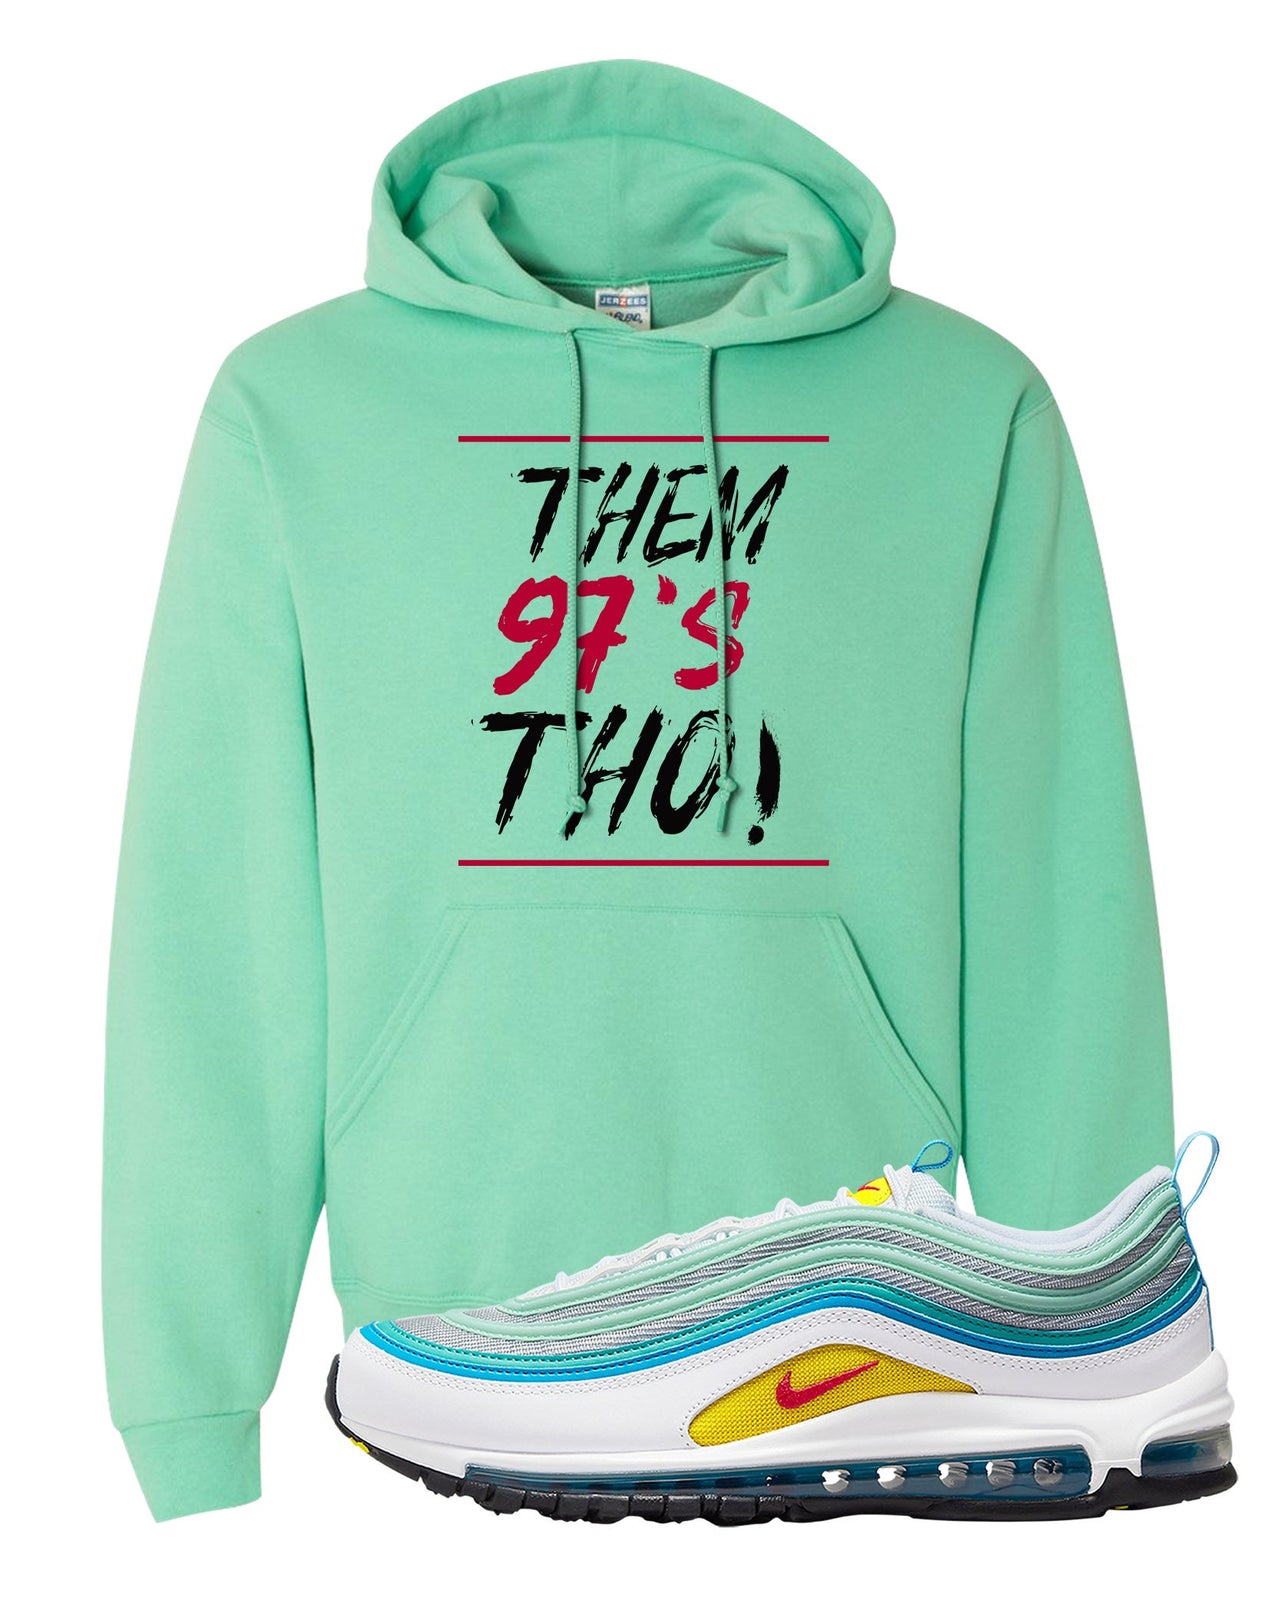 Spring Floral 97s Hoodie | Them 97's Tho, Cool Mint